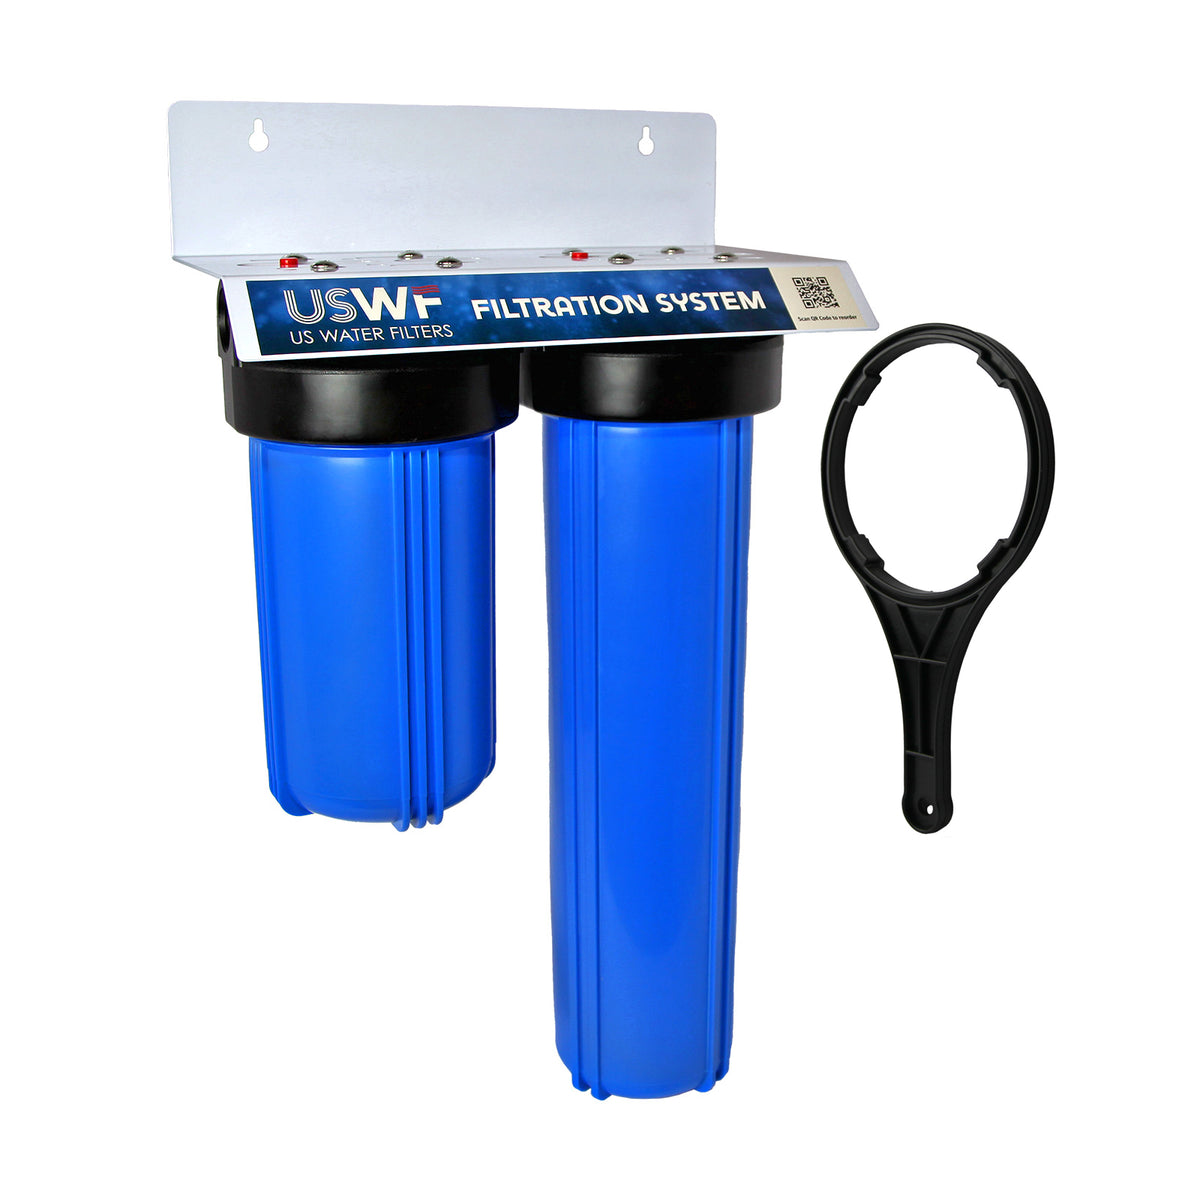 Two-Stage Big Blue 4.5&quot;x10&quot; &amp; 20&quot;  Filter Housing by USWF, 3/4&quot; Inlet/Outlet, w/mounting bracket &amp; wrench